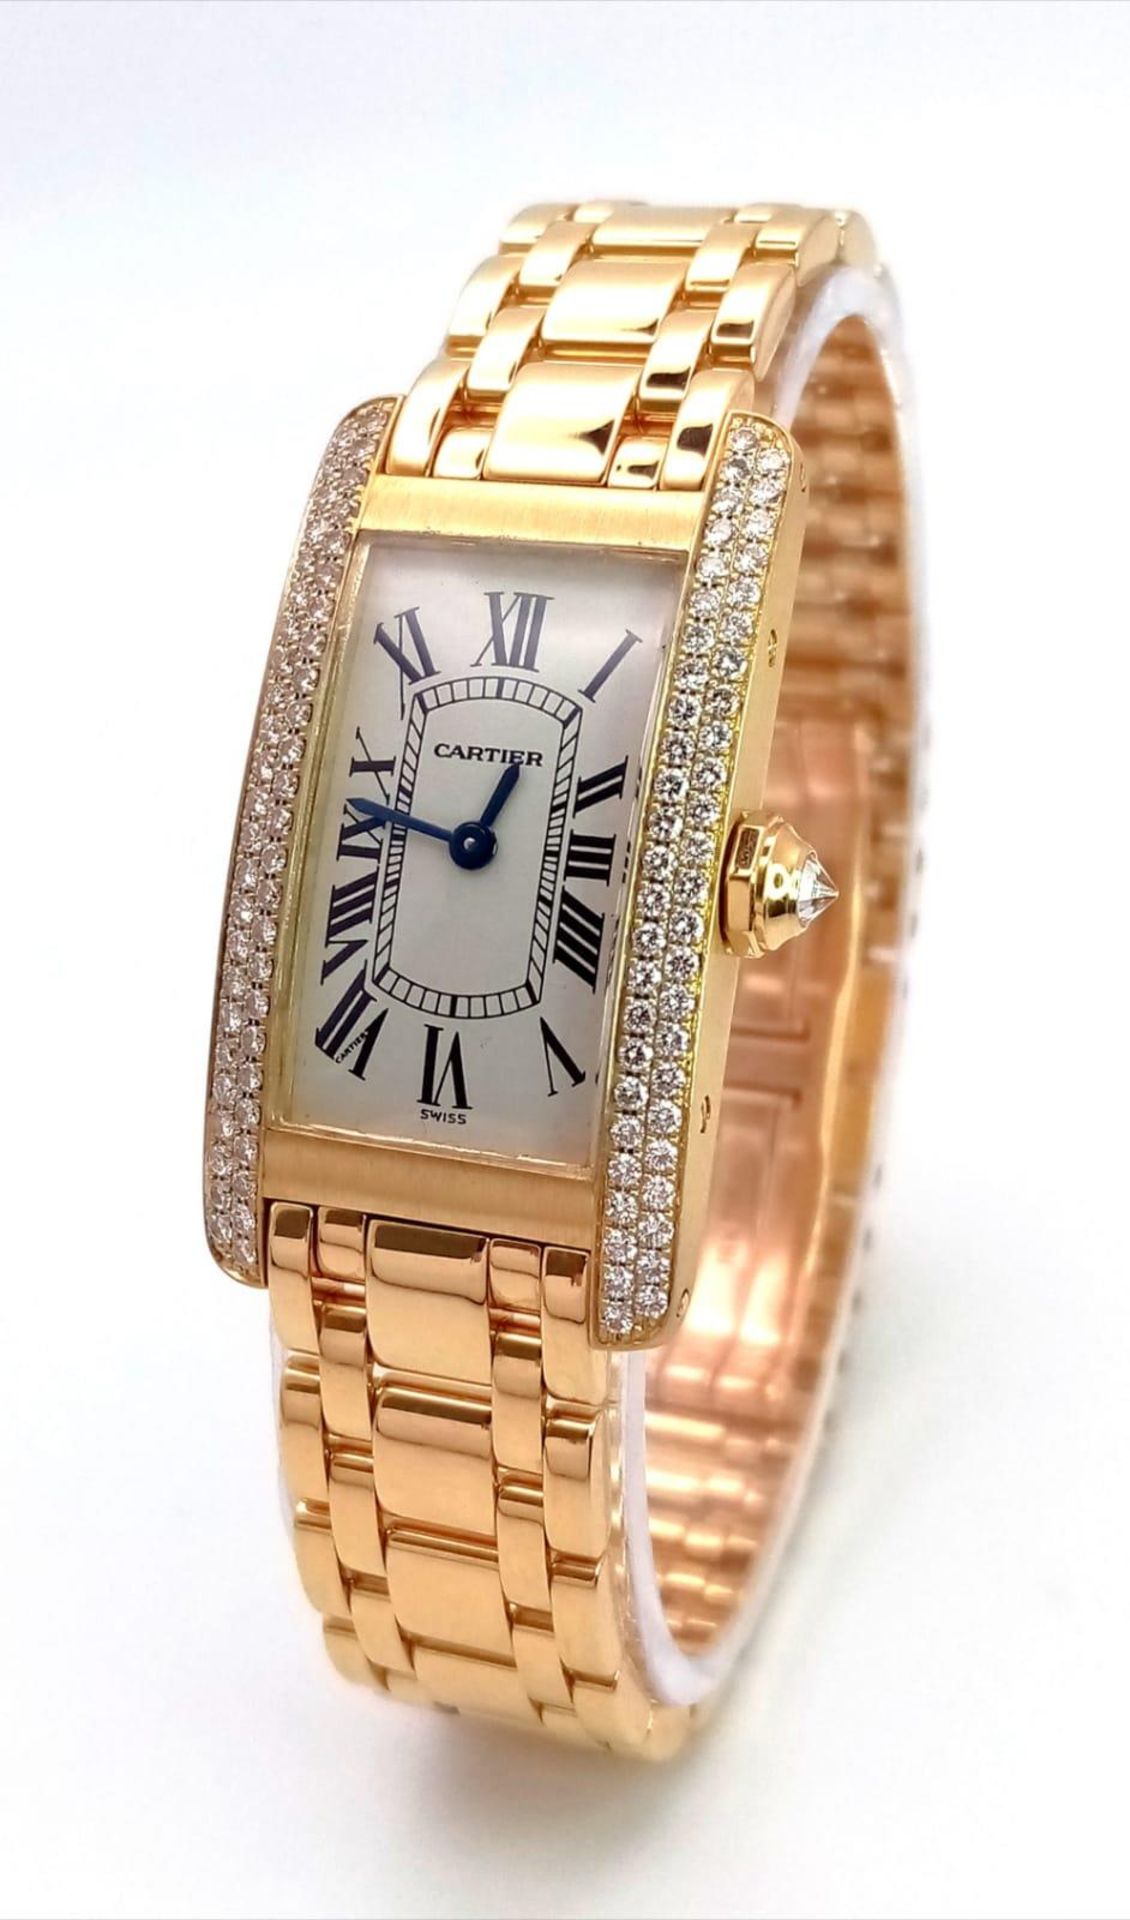 An 18K Gold and Diamond Cartier Tank Americaine Ladies Watch. 18K gold bracelet and case - 19mm